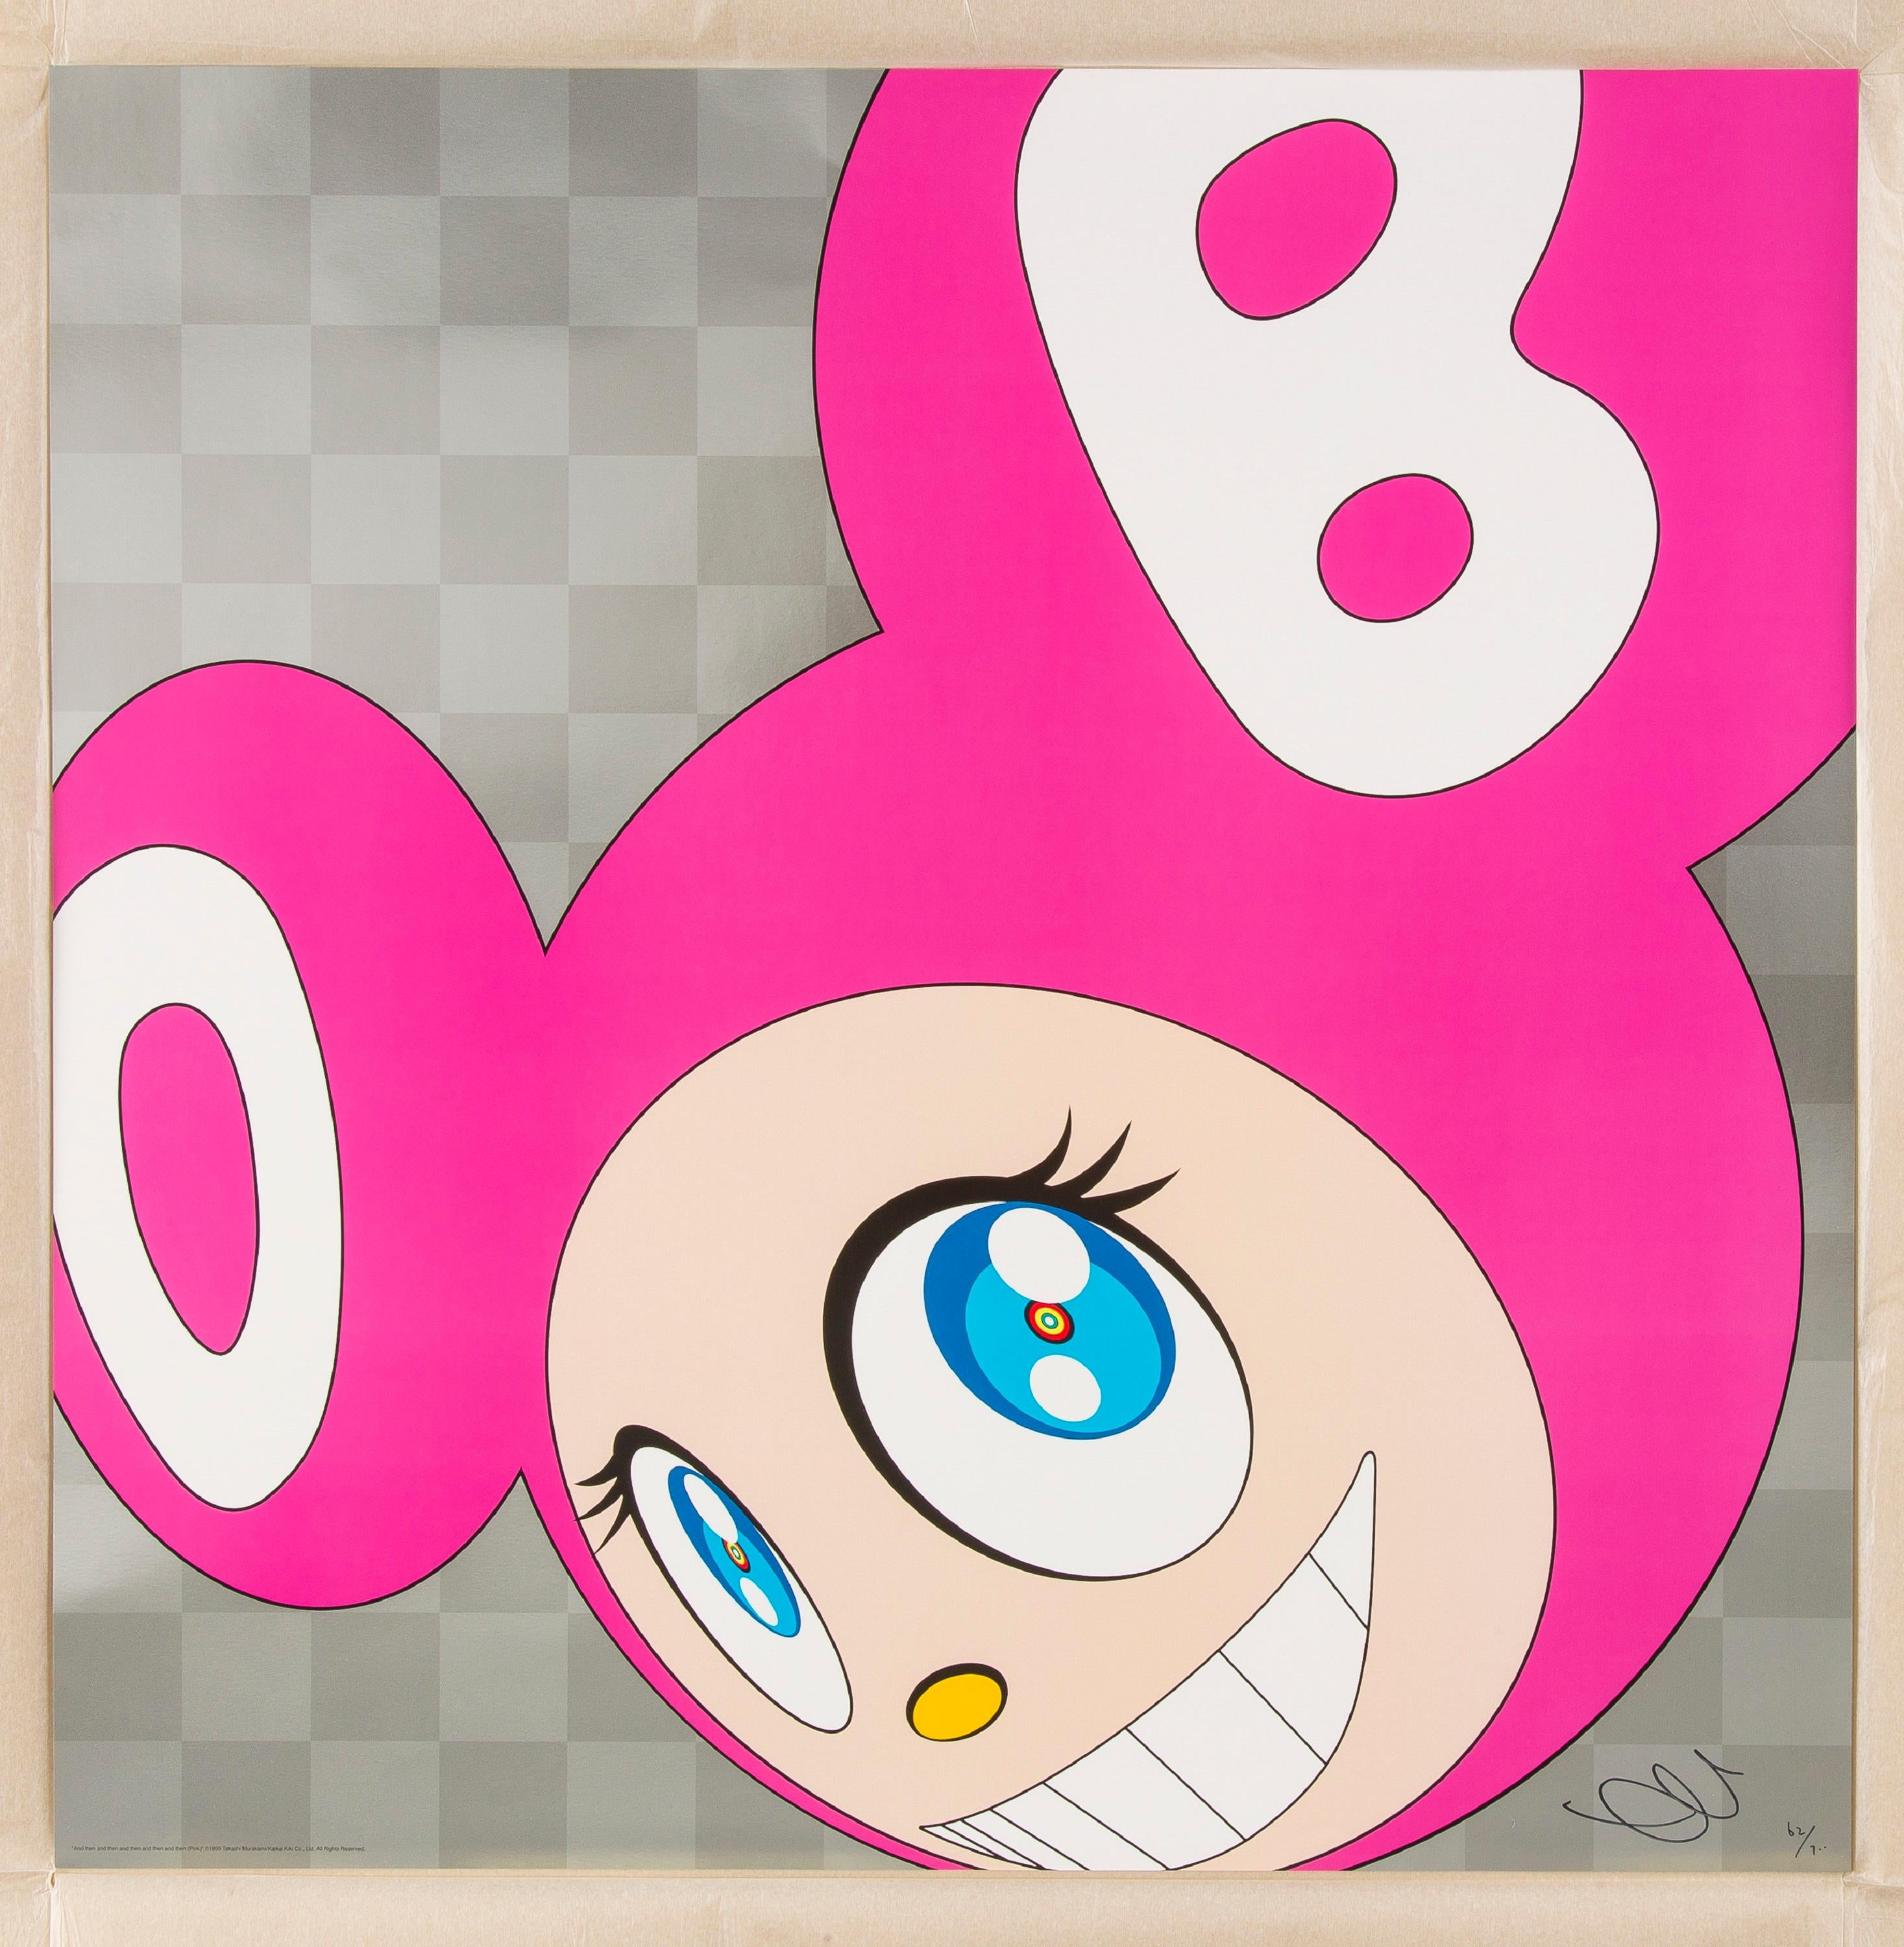 And Then and then and then and then and then (Pink), 1999 by Takashi Murakami
Offset print, in silver ink signed and numbered by the artist
26 4/5 × 26 4/5 in
68 × 68 cm
Edition 62/300

The design for Mr. DOB was inspired by several animated figures